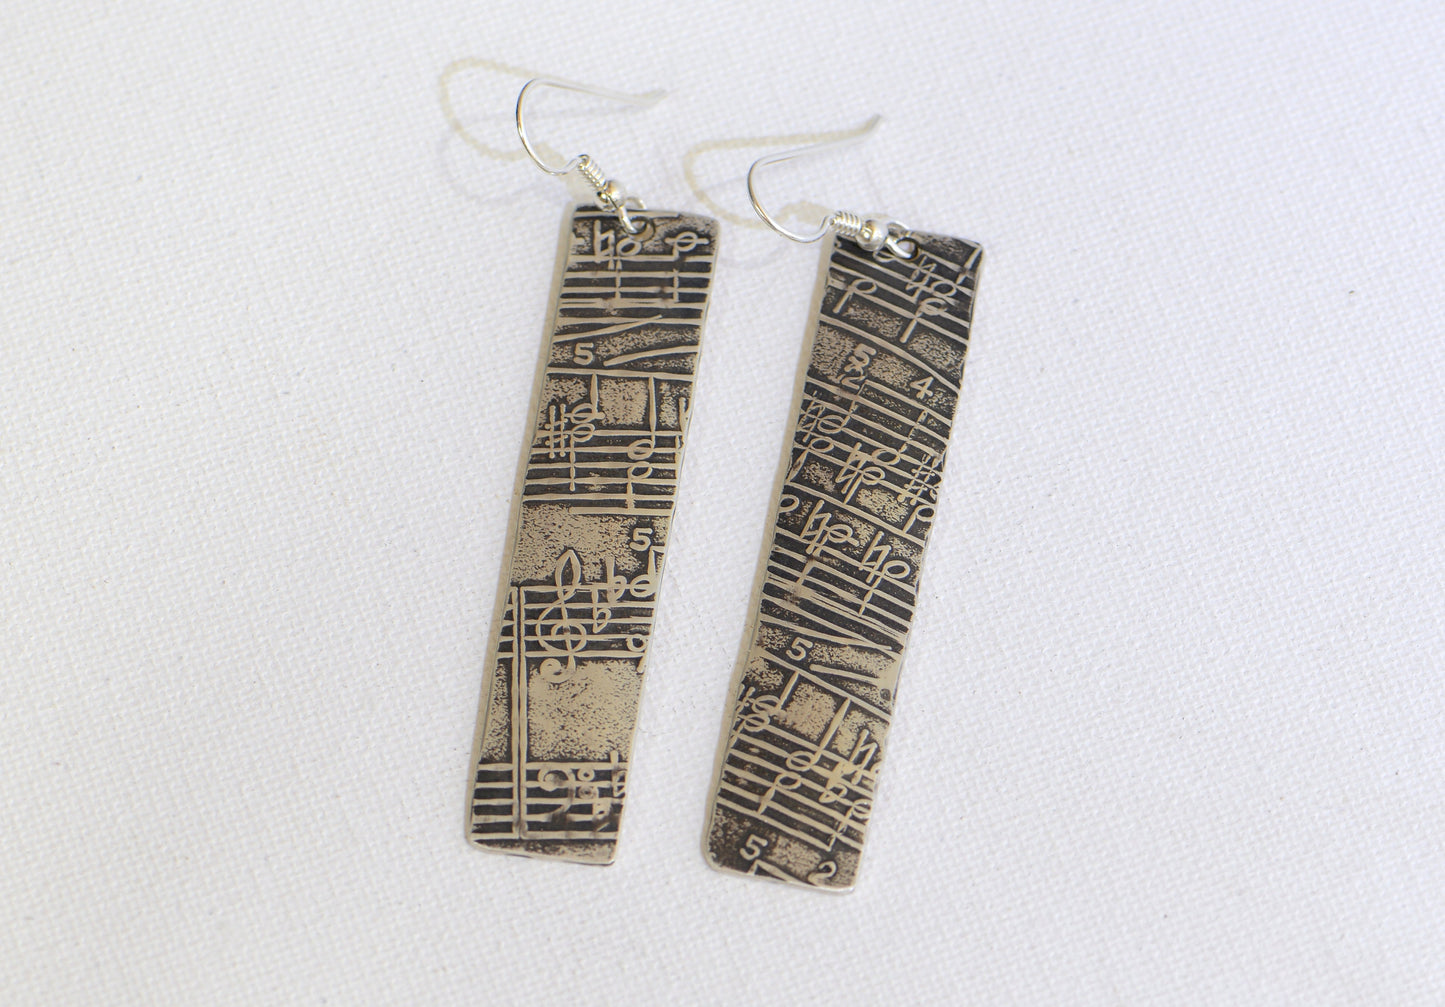 Musical Sterling Silver Earrings with Melodic Inspiration scrolled out on Antiqued Sheet Music Design